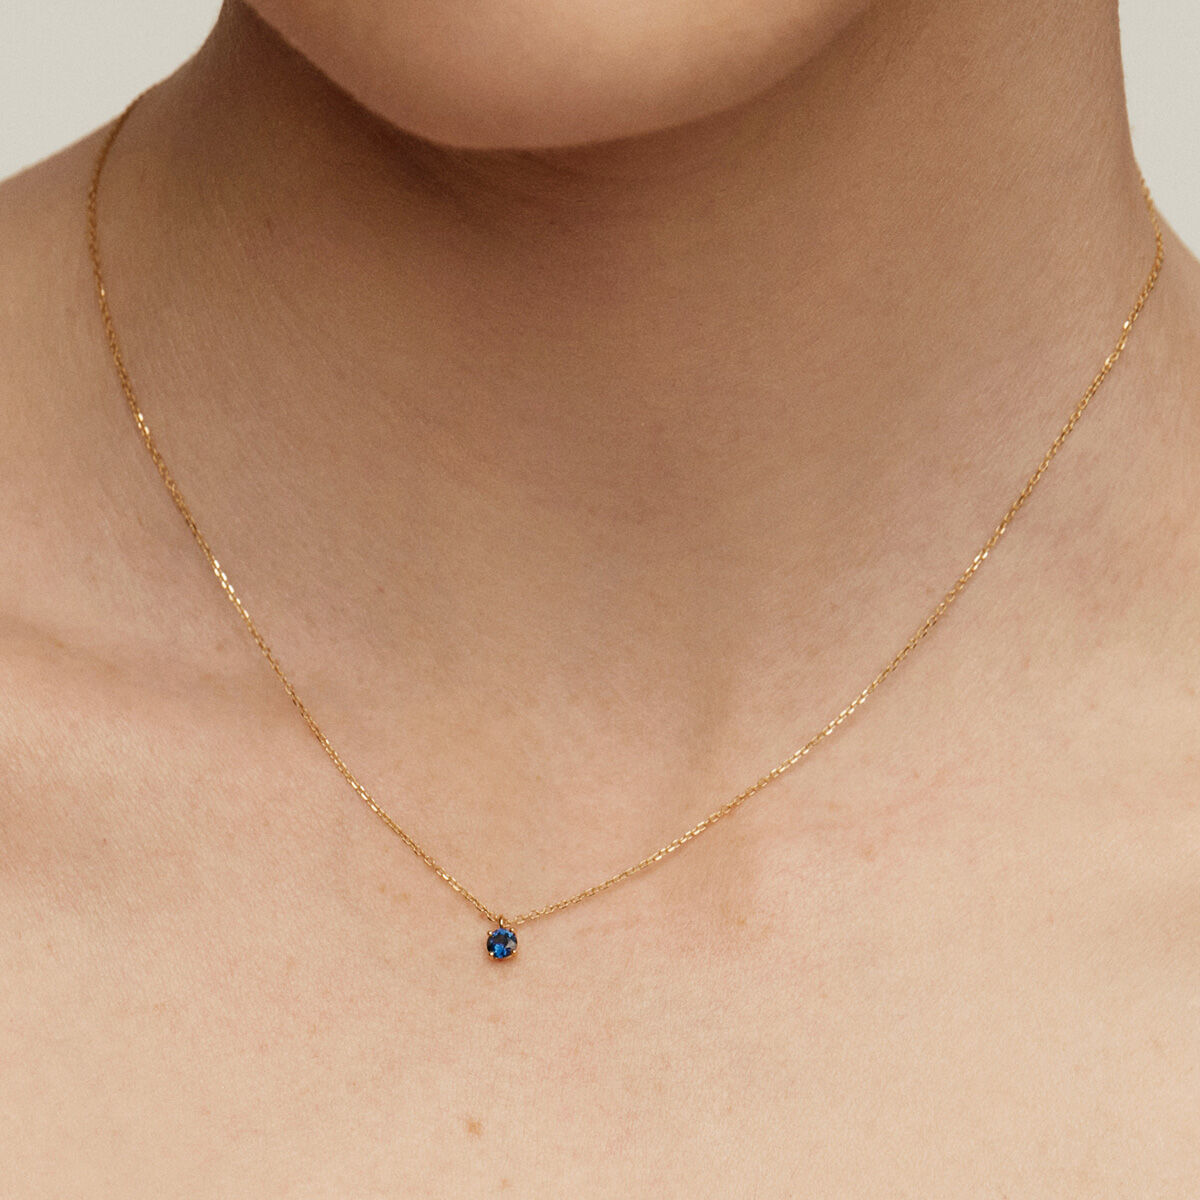 Pendant in 9k yellow gold with a blue sapphire , J04084-02-BS, hi-res